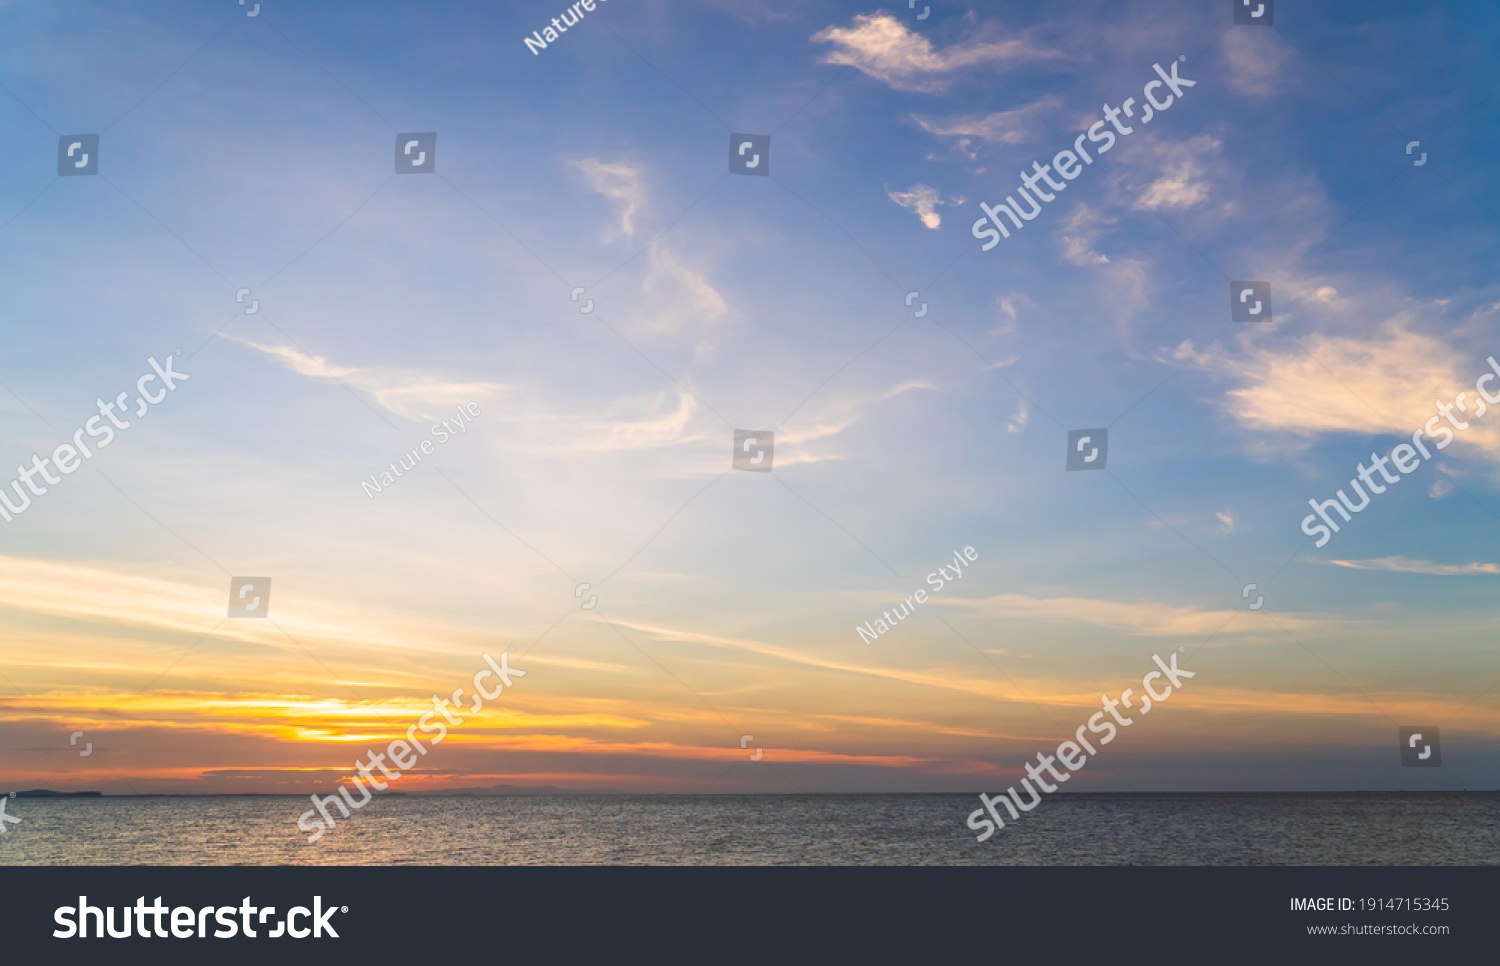 Sunset Horizon Sky over sea in the Evening with Romantic colorful Orange sunlight cloud, Dusk sky background  #1914715345